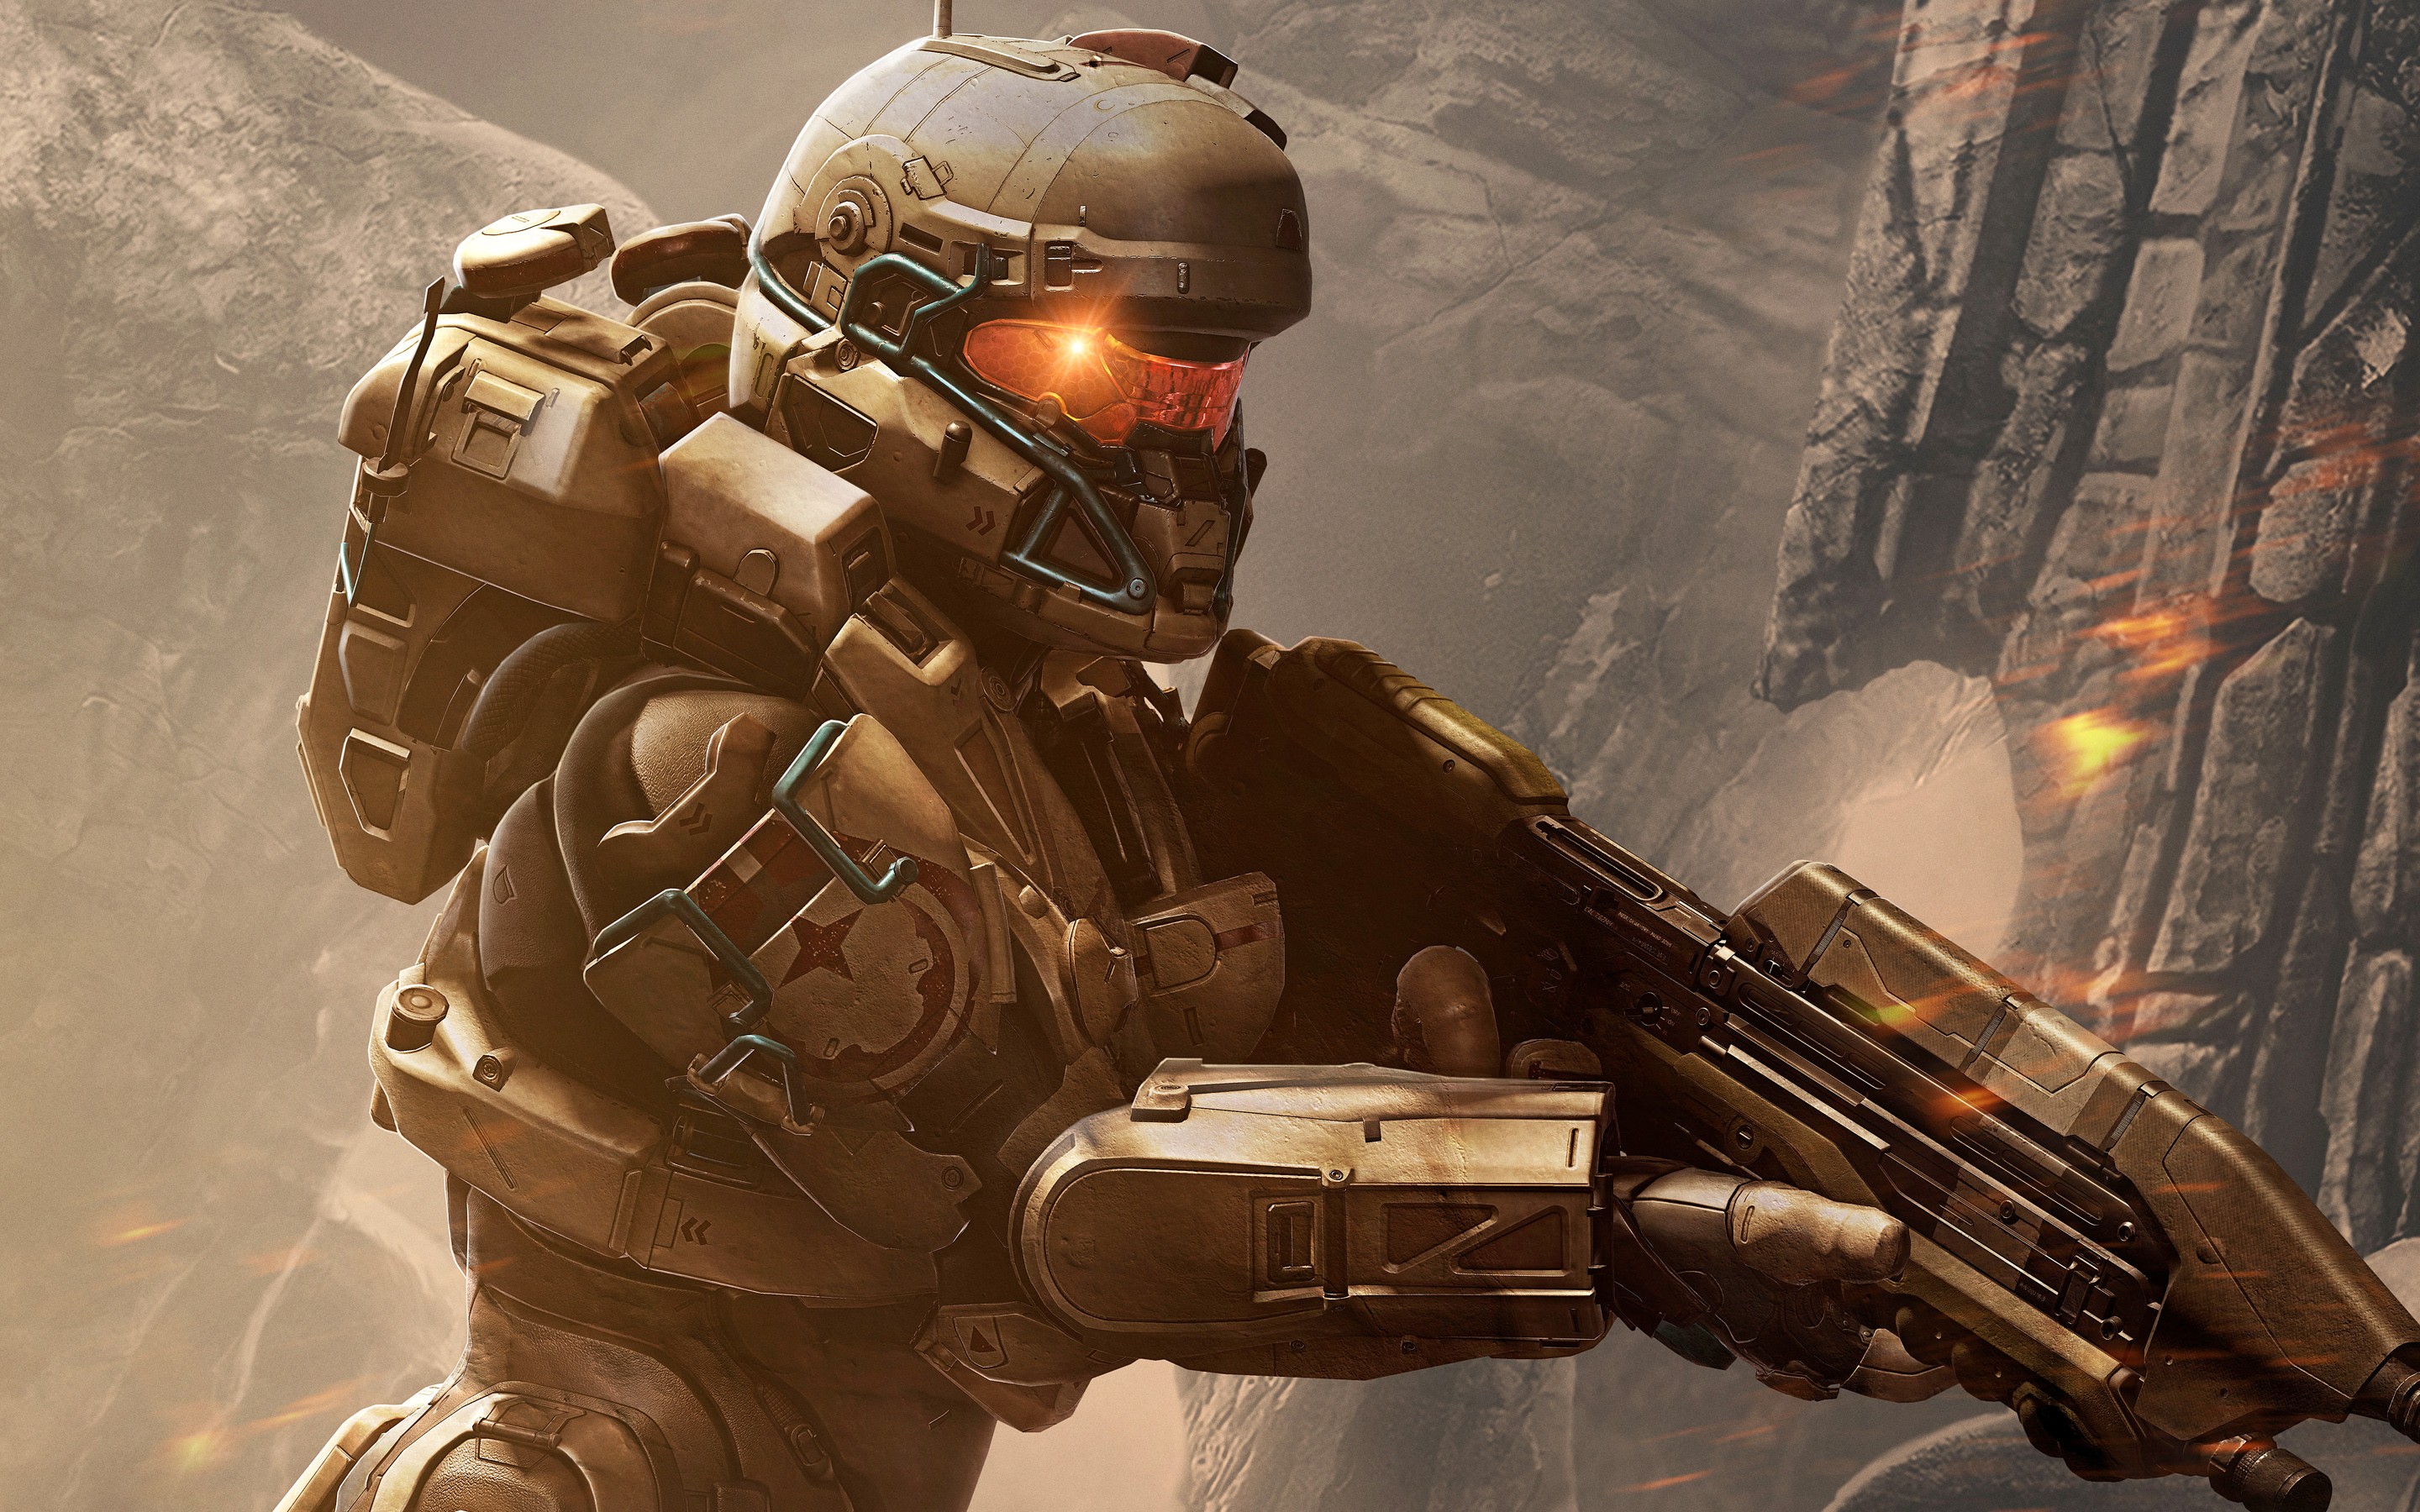 General 2880x1800 Halo 5 Video Game Heroes armor video games weapon science fiction video game art Futuristic Weapons